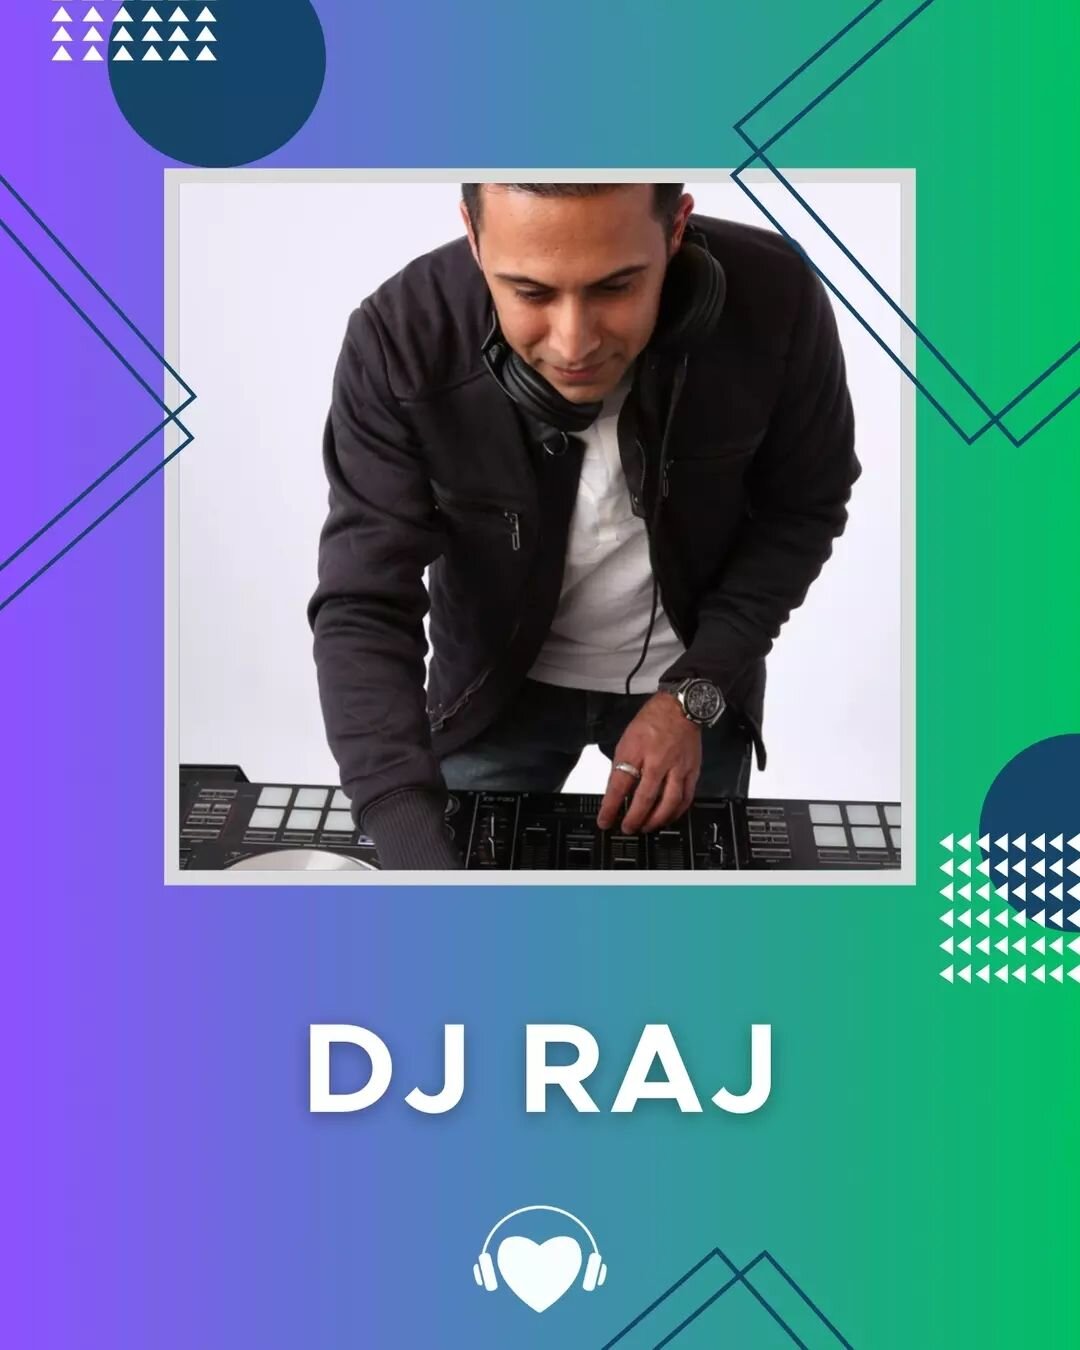 Meet DJ Raj - one of the best Indian &amp; South Asian DJs in SoCal! He has creative mixing skills and plays everything from Dance to Hip Hop to the Indian &amp; South Asian sounds of Bollywood, punjabi &amp; bhangra.&nbsp;These days, he mostly focus